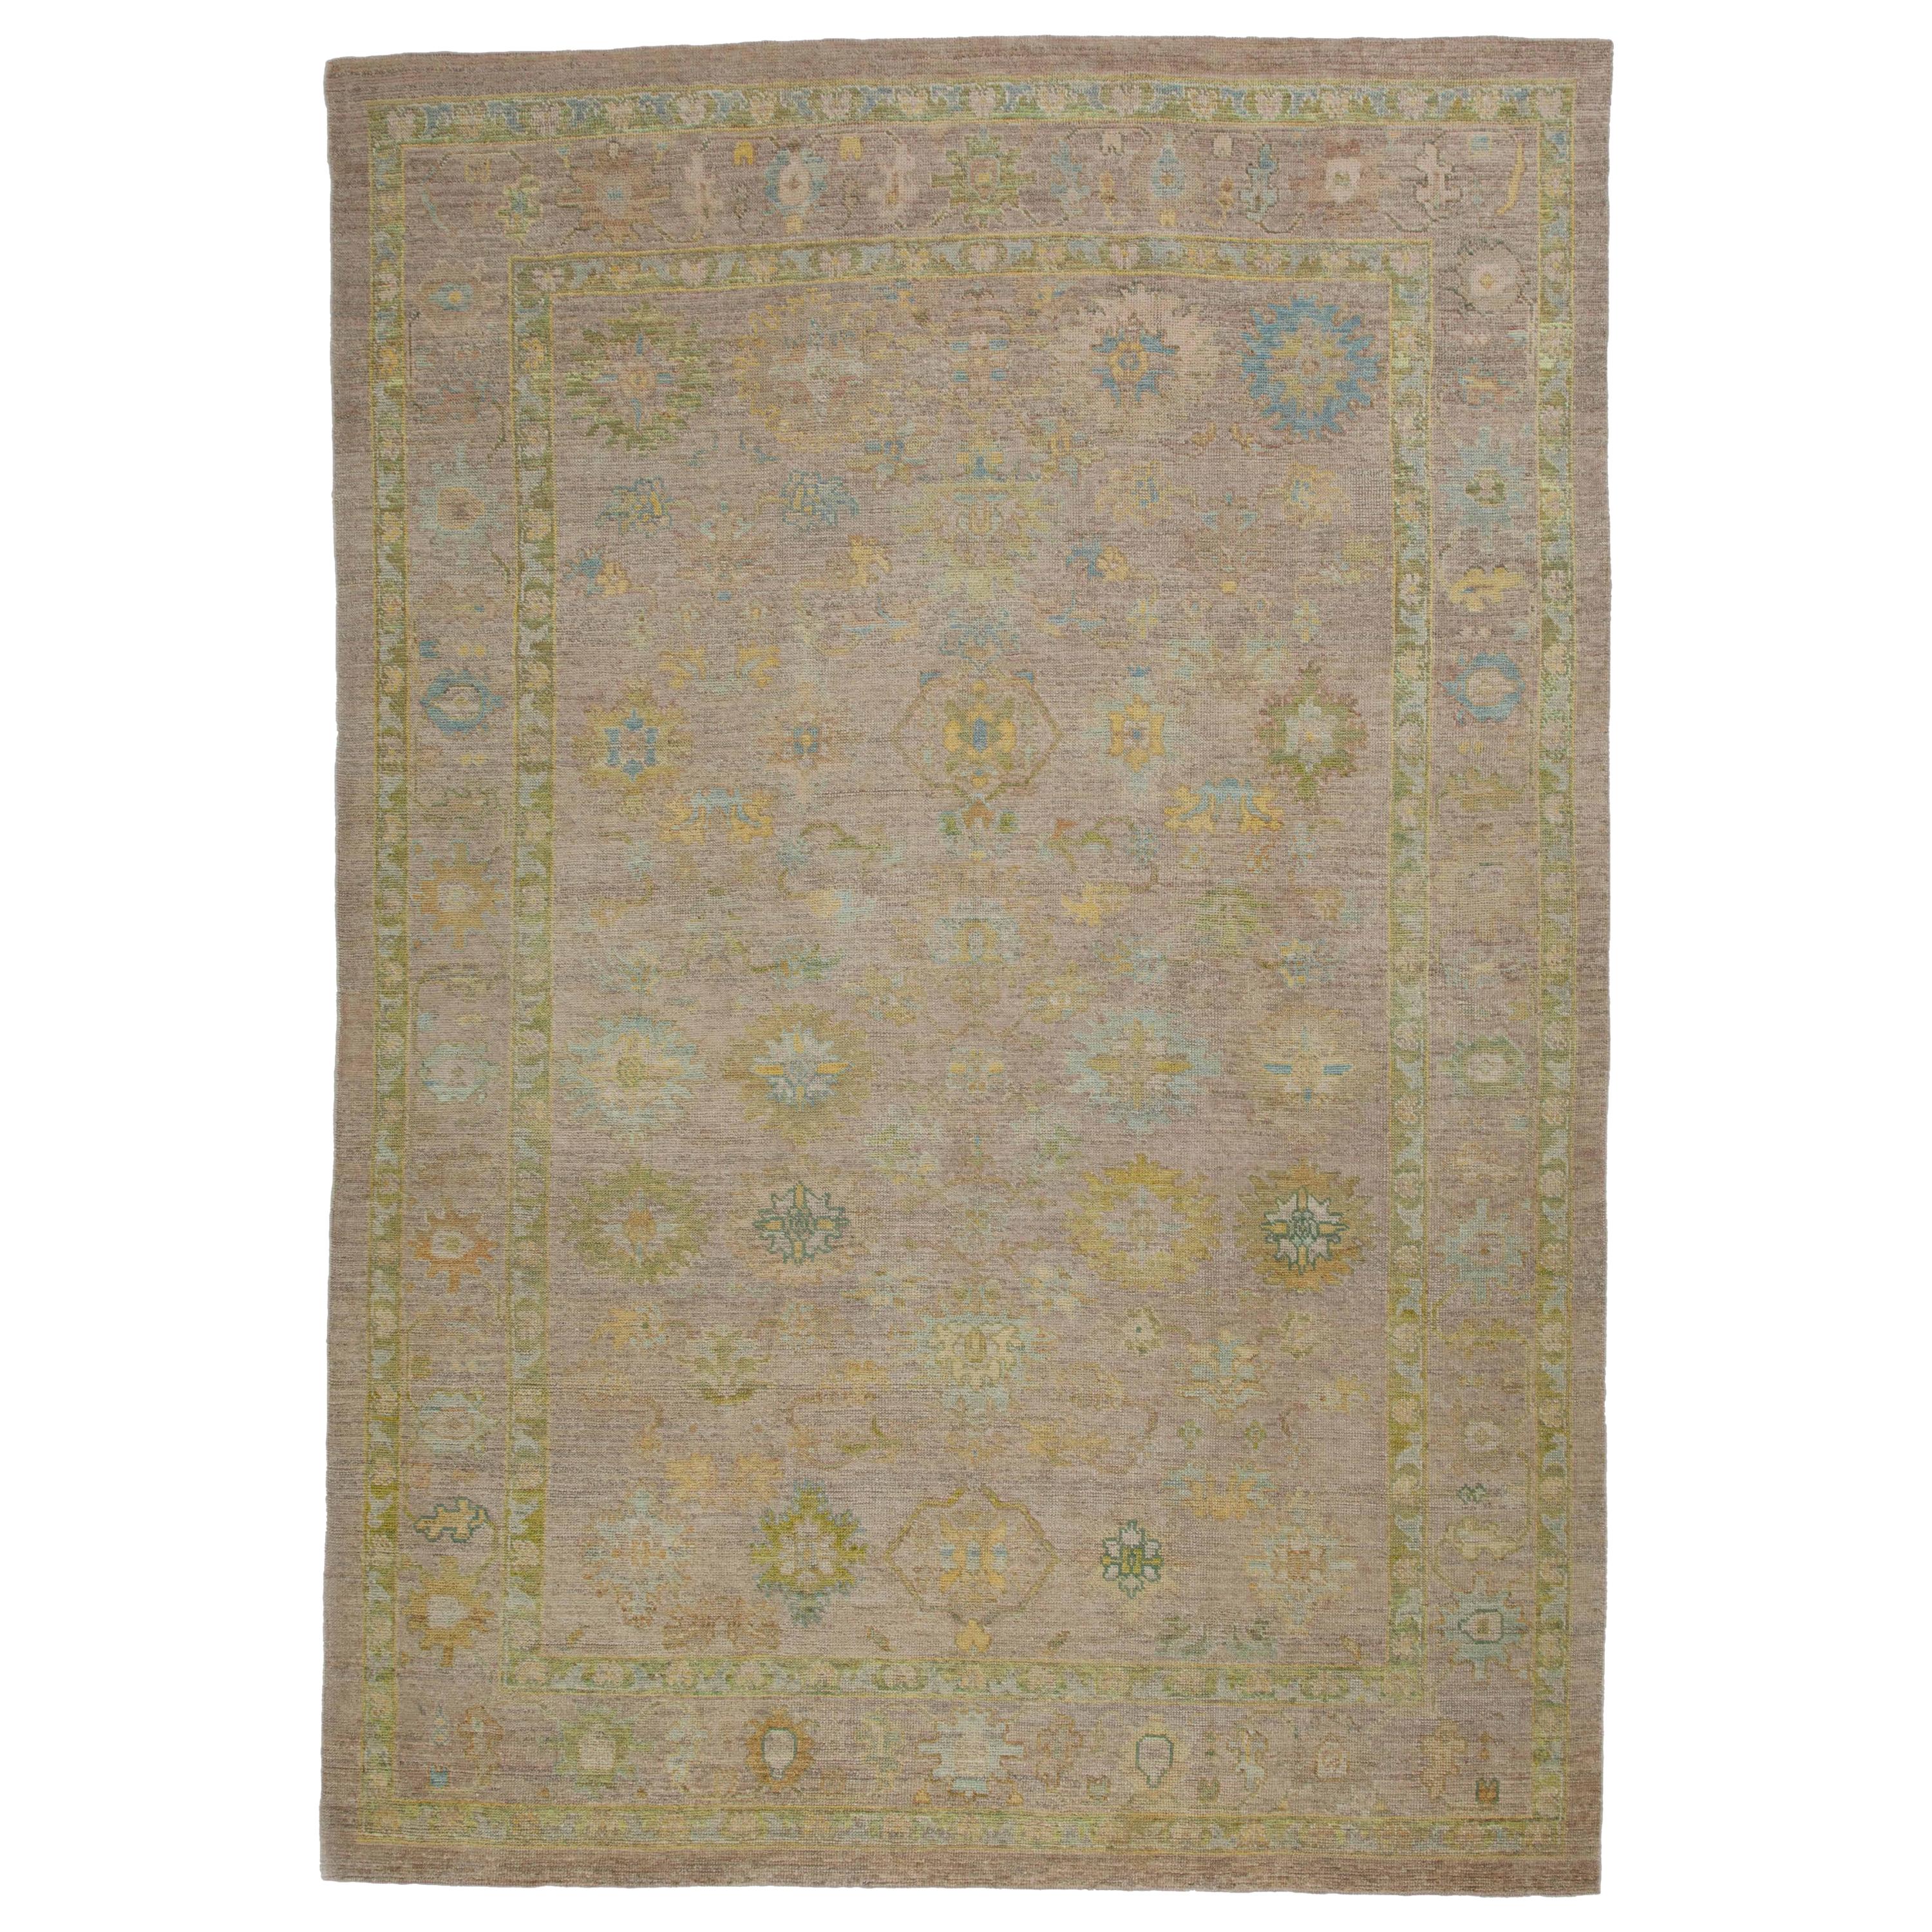 Contemporary Turkish Oushak Rug with Scattered Multicolored Floral Details For Sale